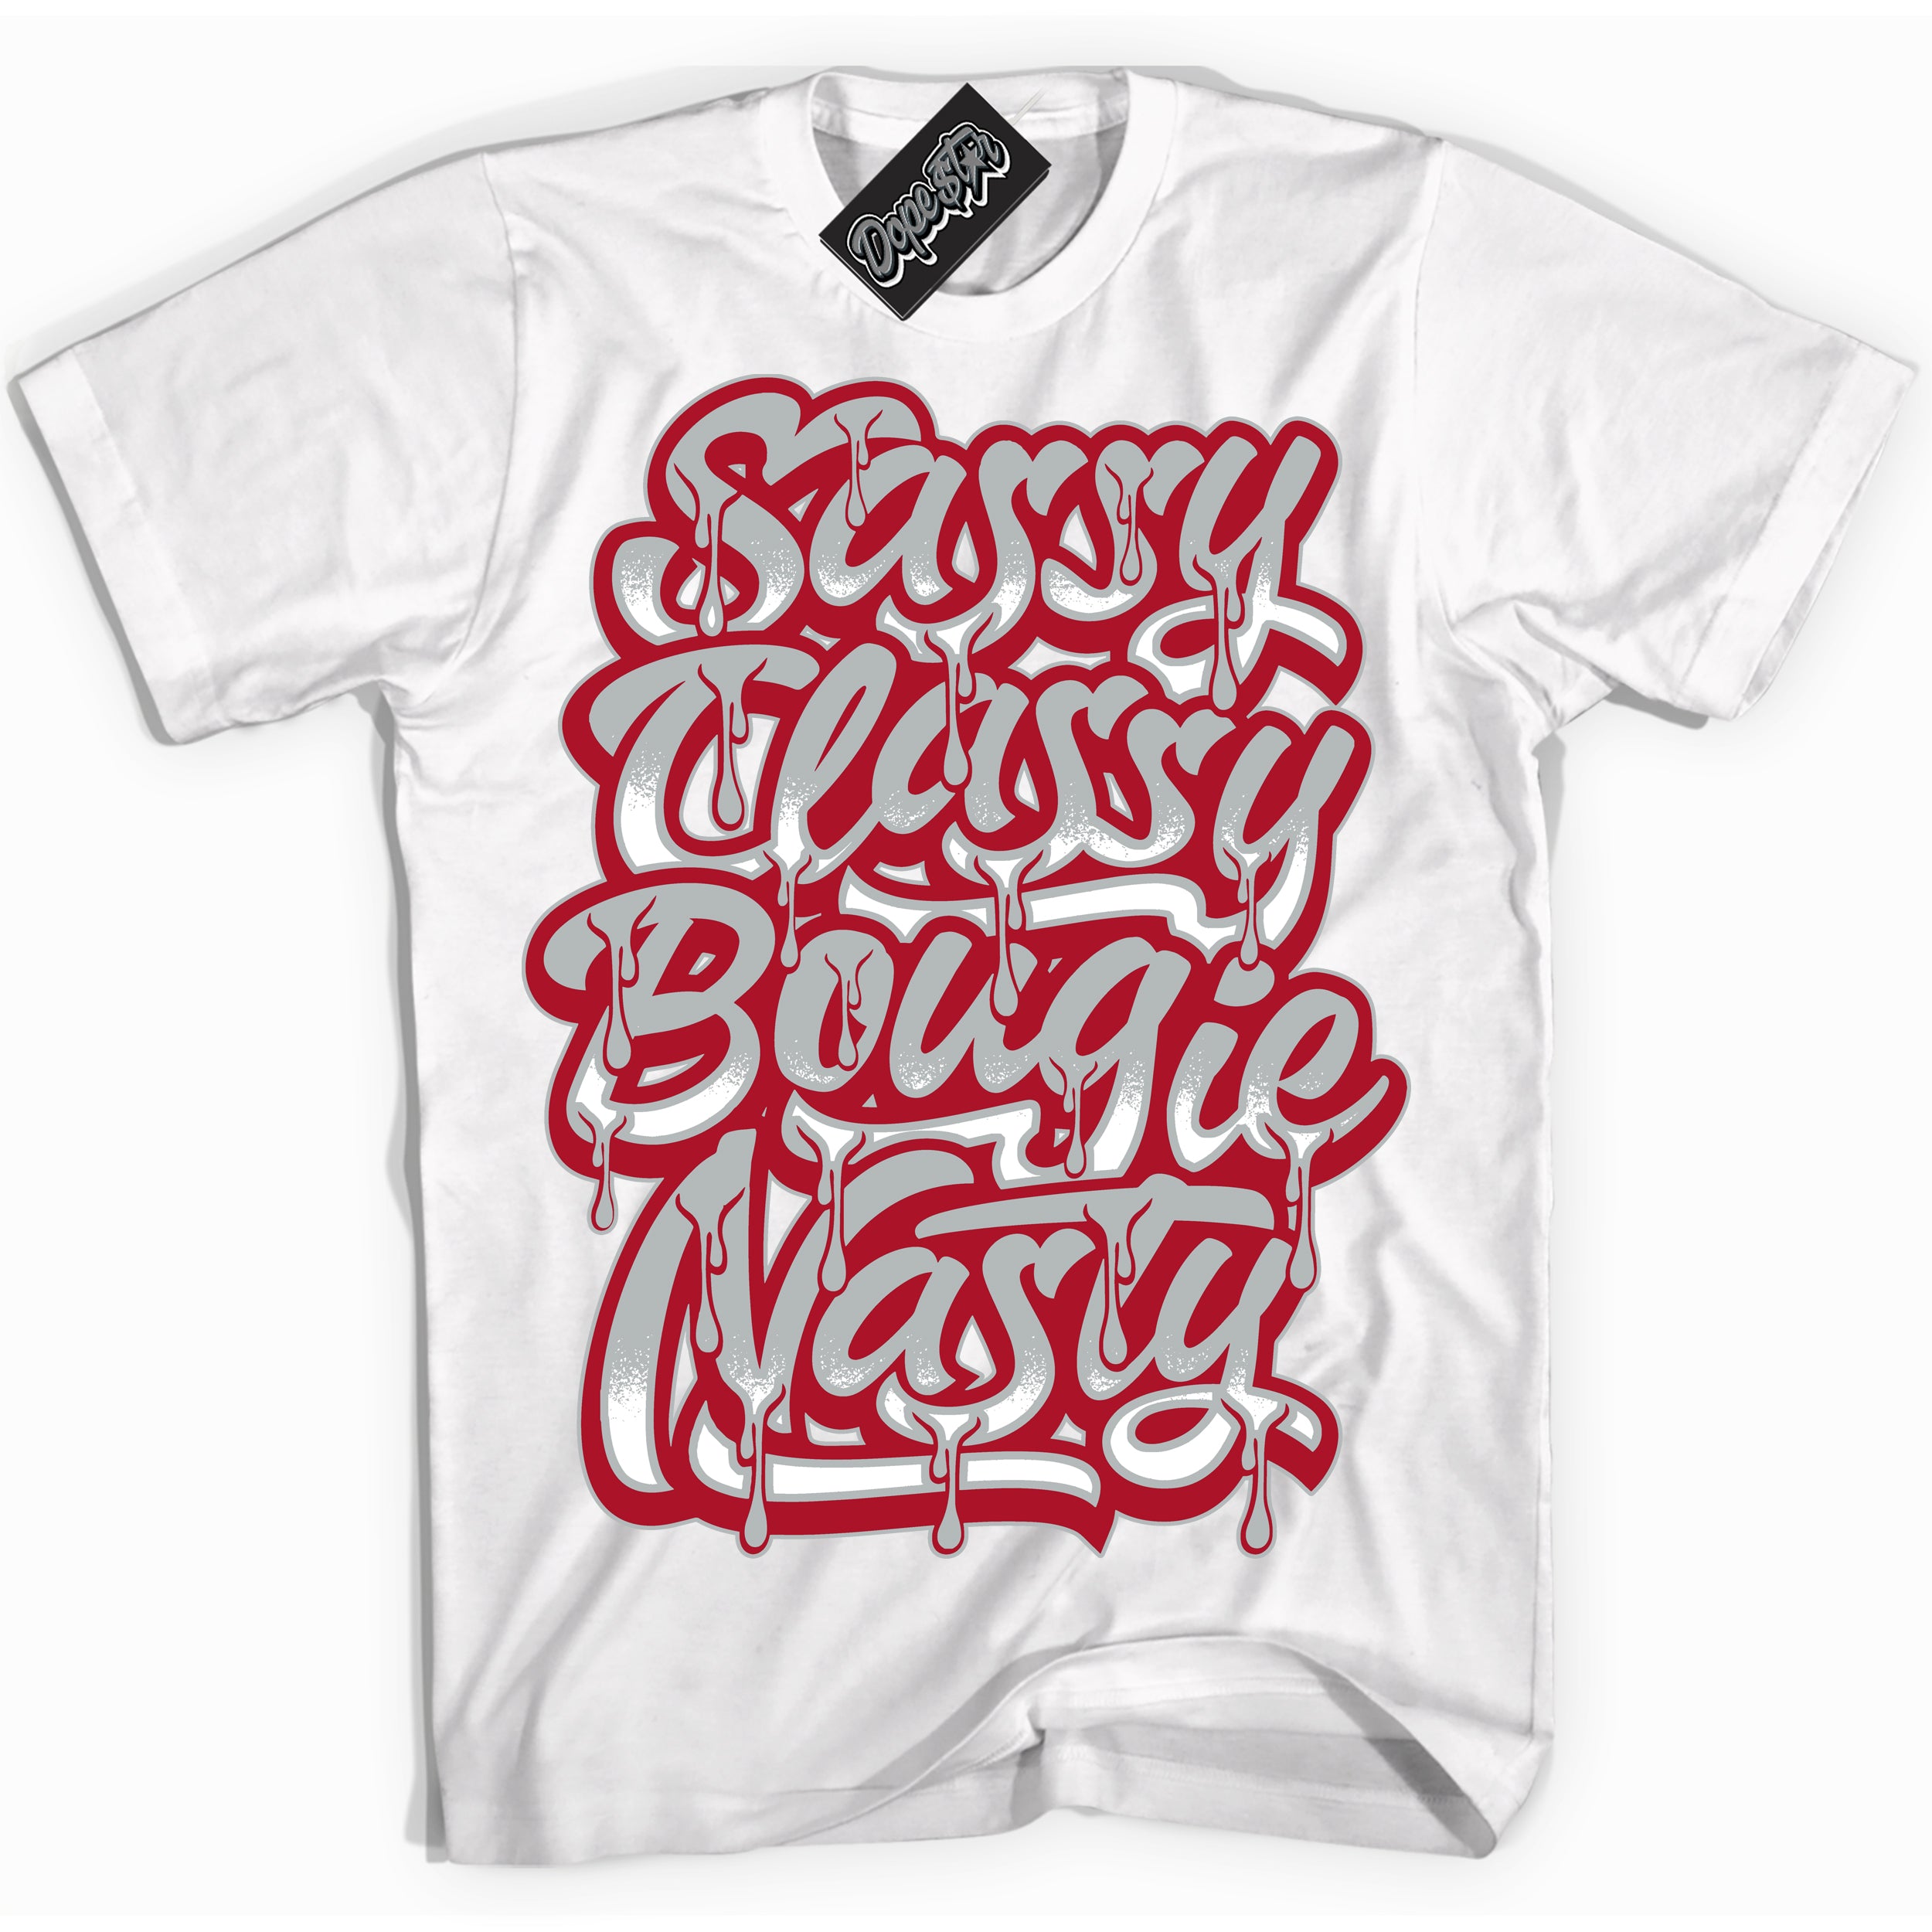 Cool White Shirt with “ Sassy Classy” design that perfectly matches Reverse Ultraman Sneakers.